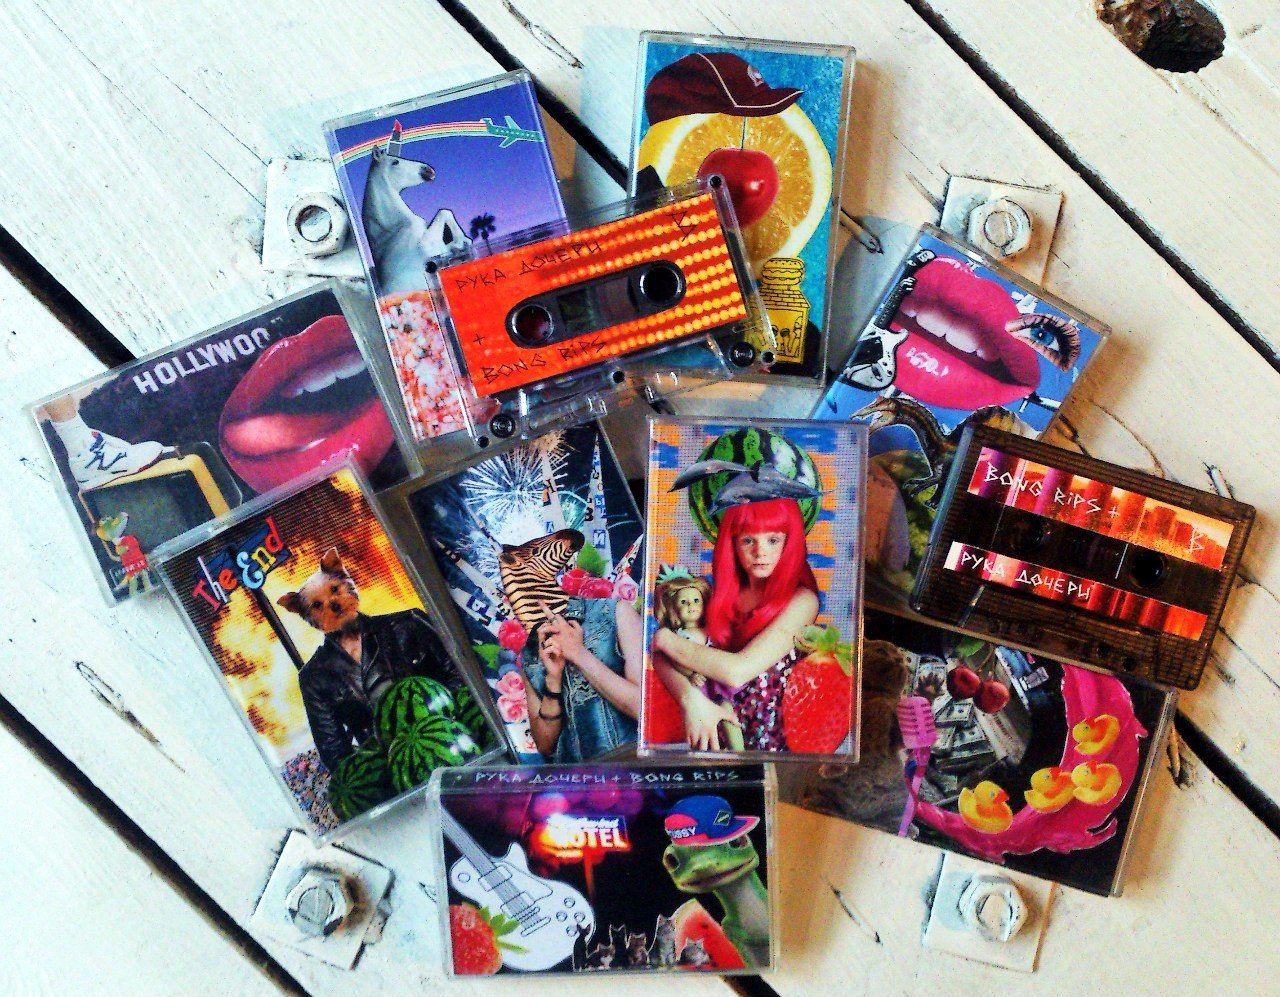 A mix of indie label cassettes. Image: Nastya Romakhova